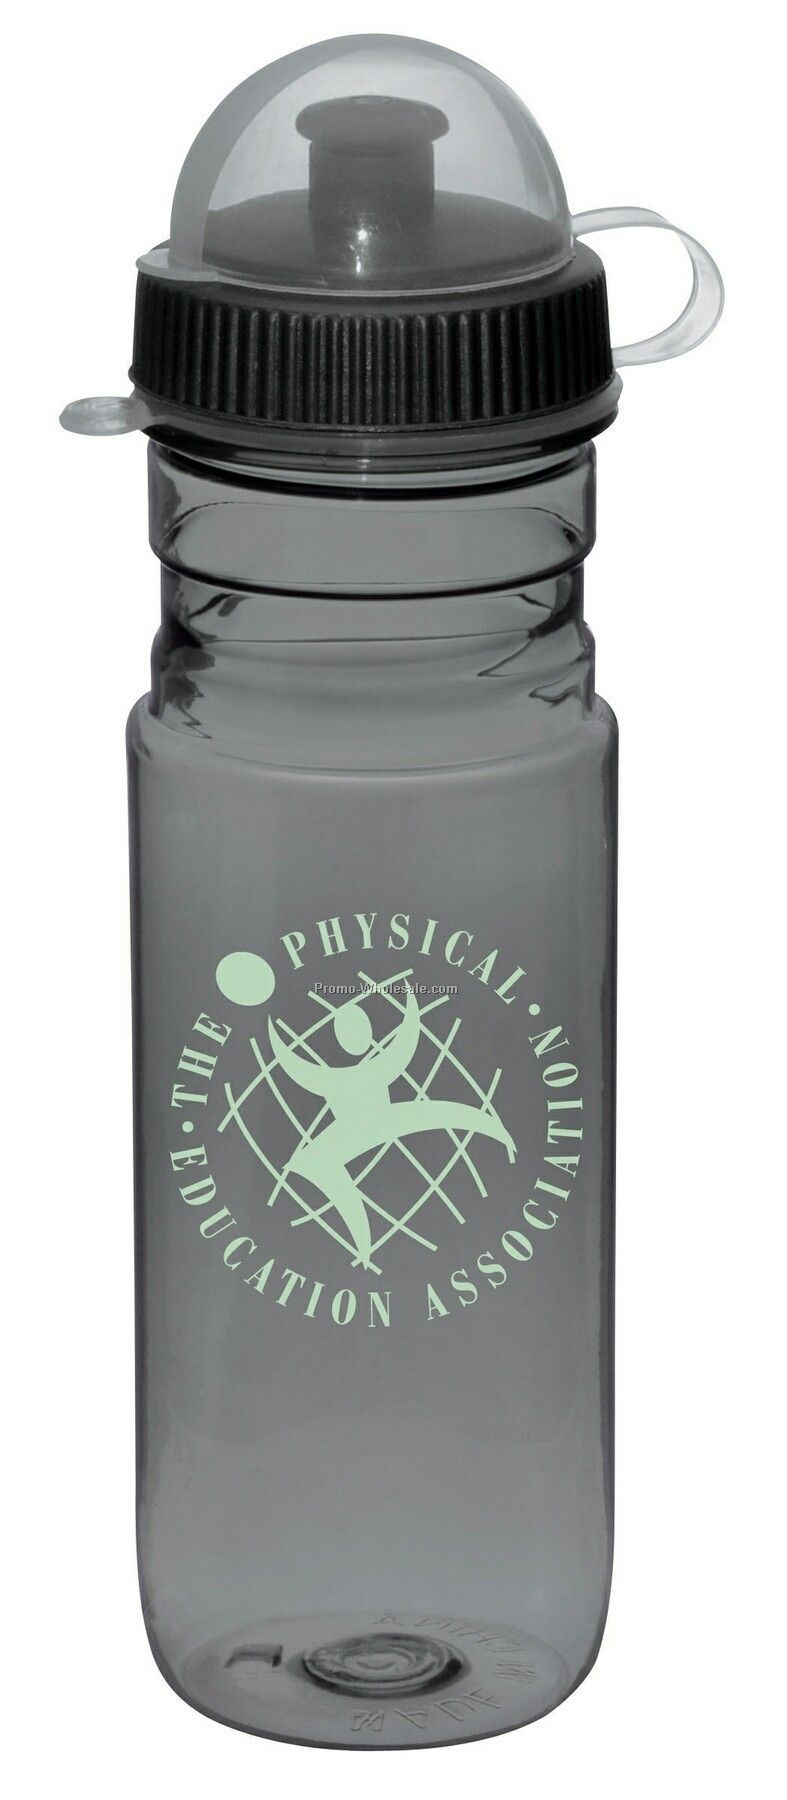 The Springs Sports Bottle